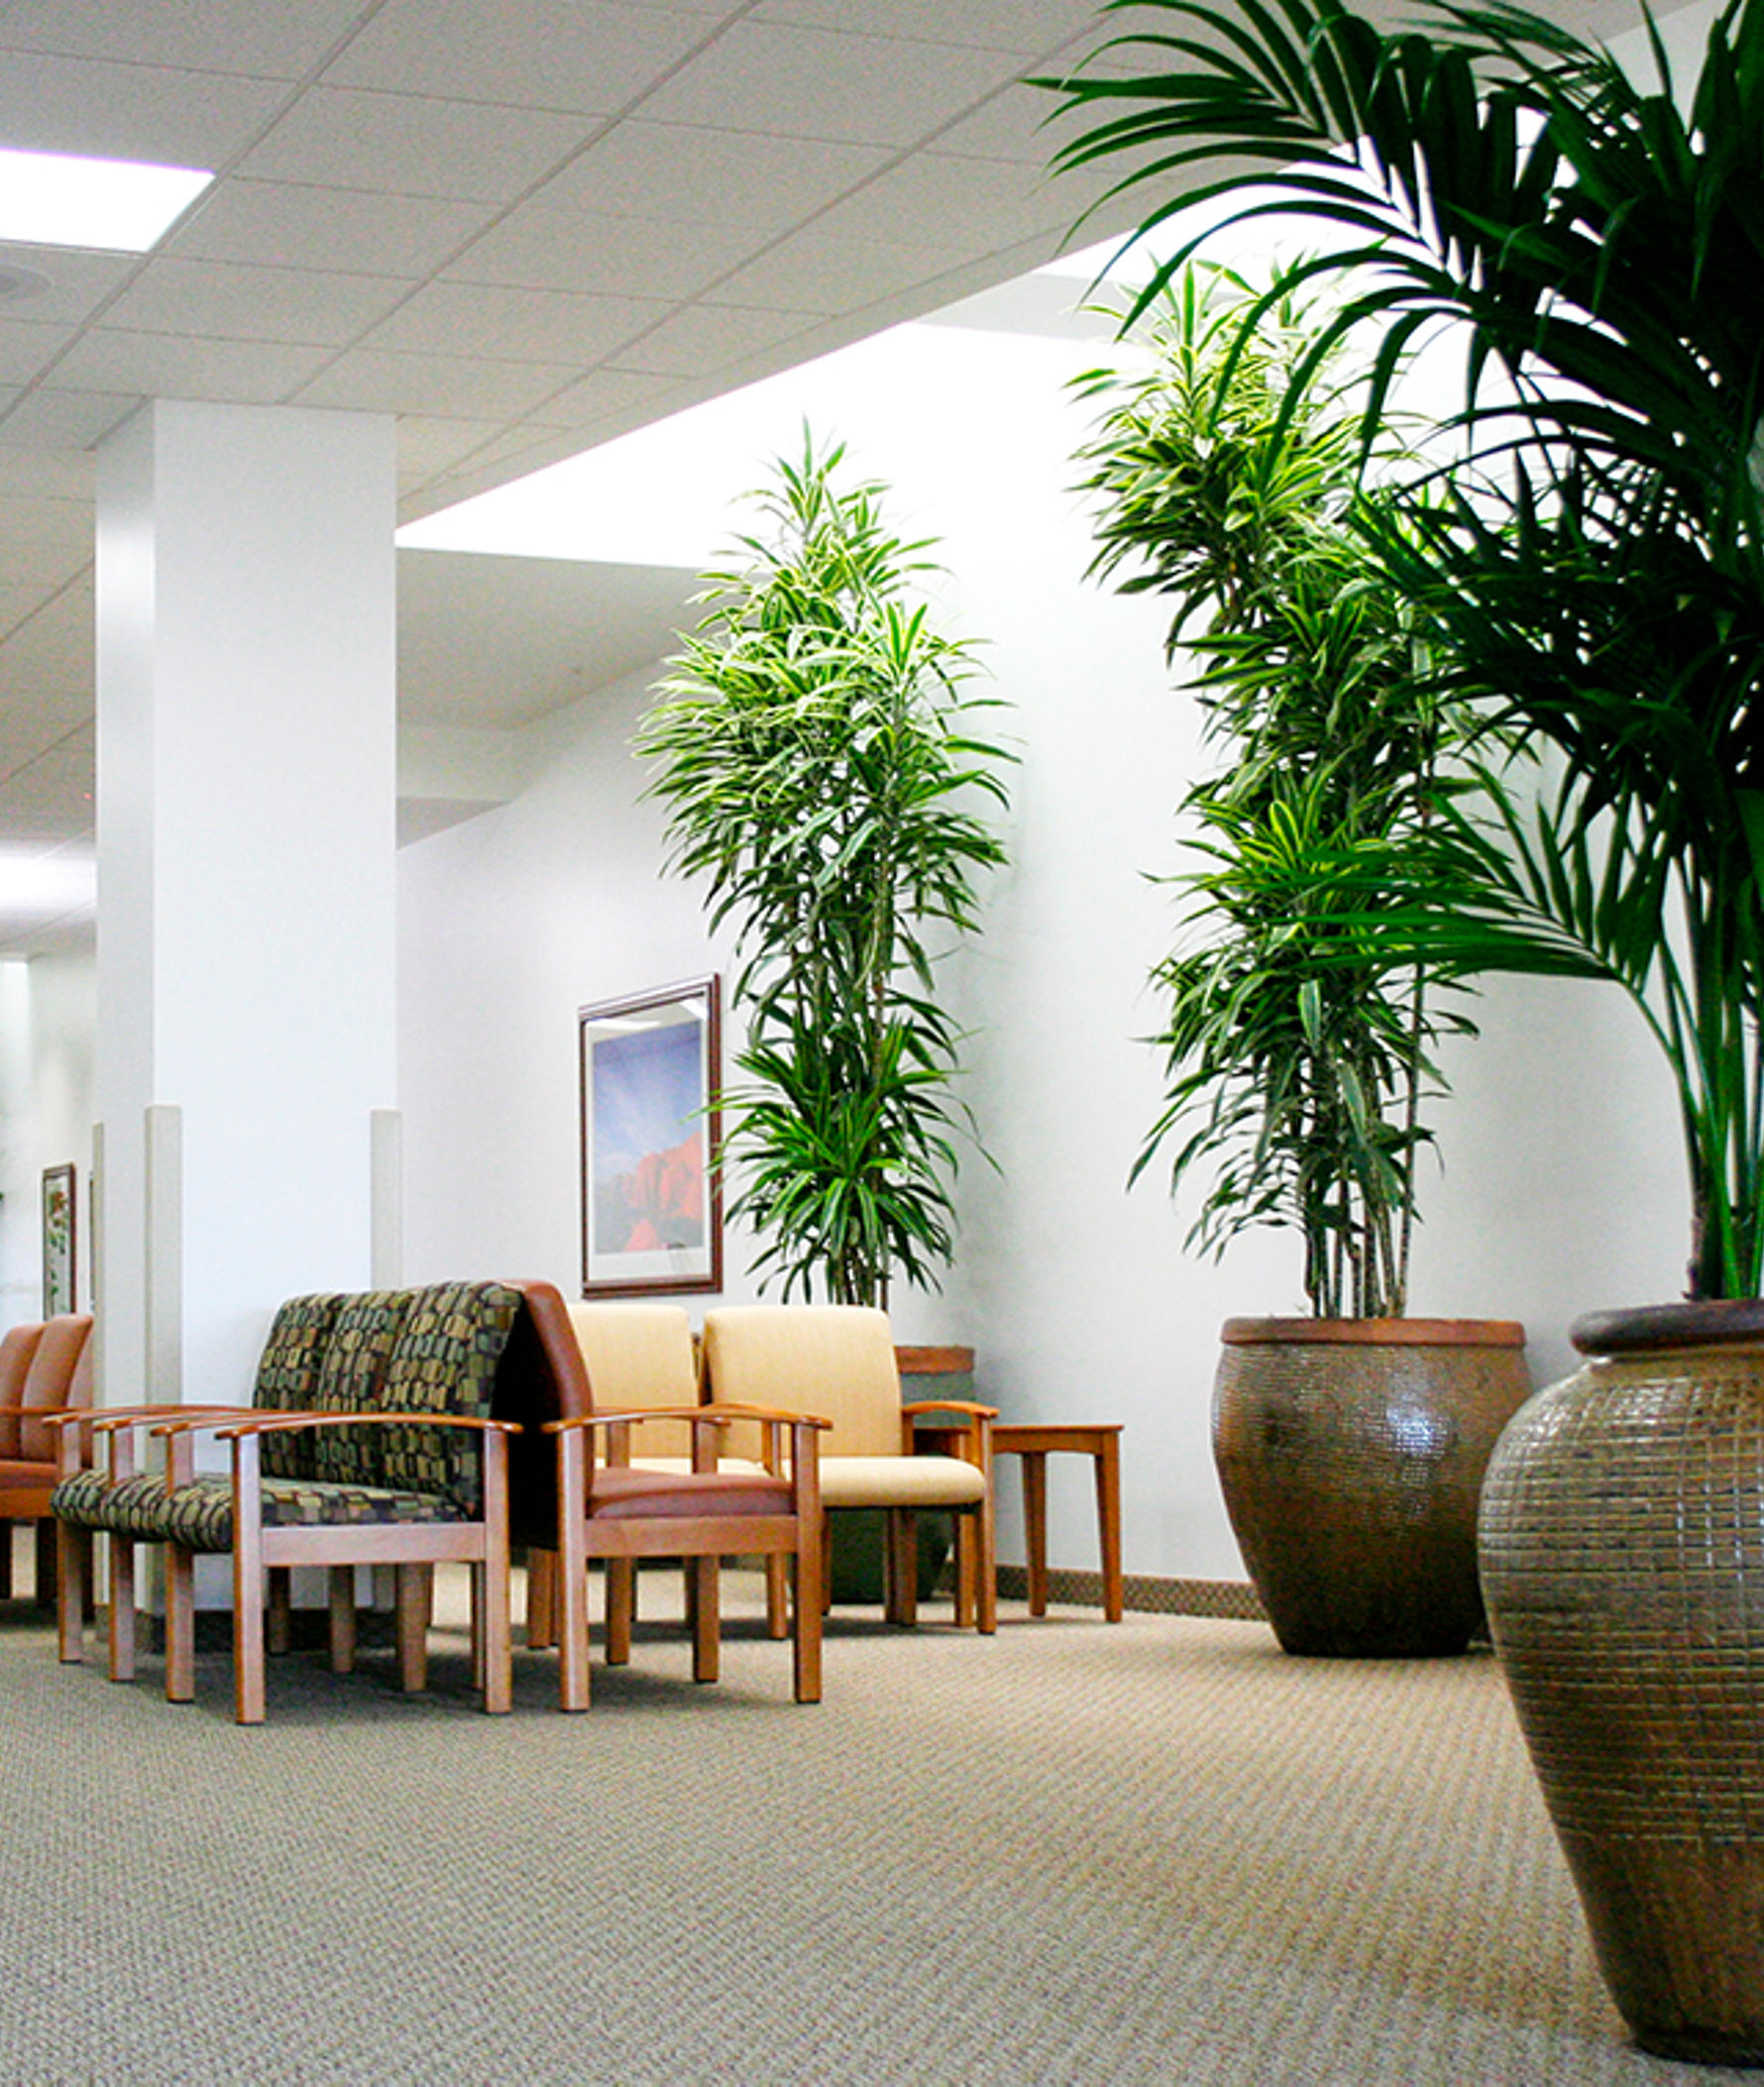 trees planted in ceramic pottery in a lobby waiting room